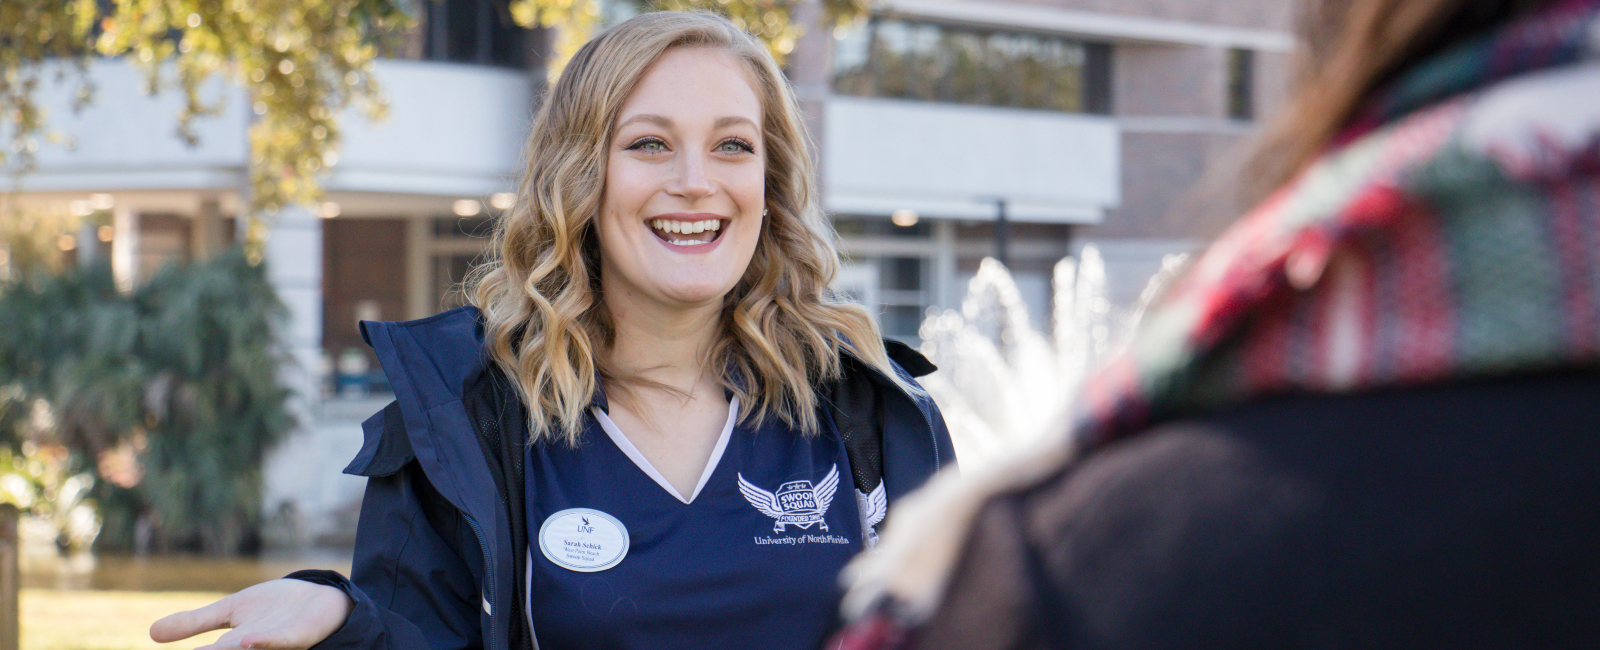 Female student worker in UNF branded clothing smiling while outside